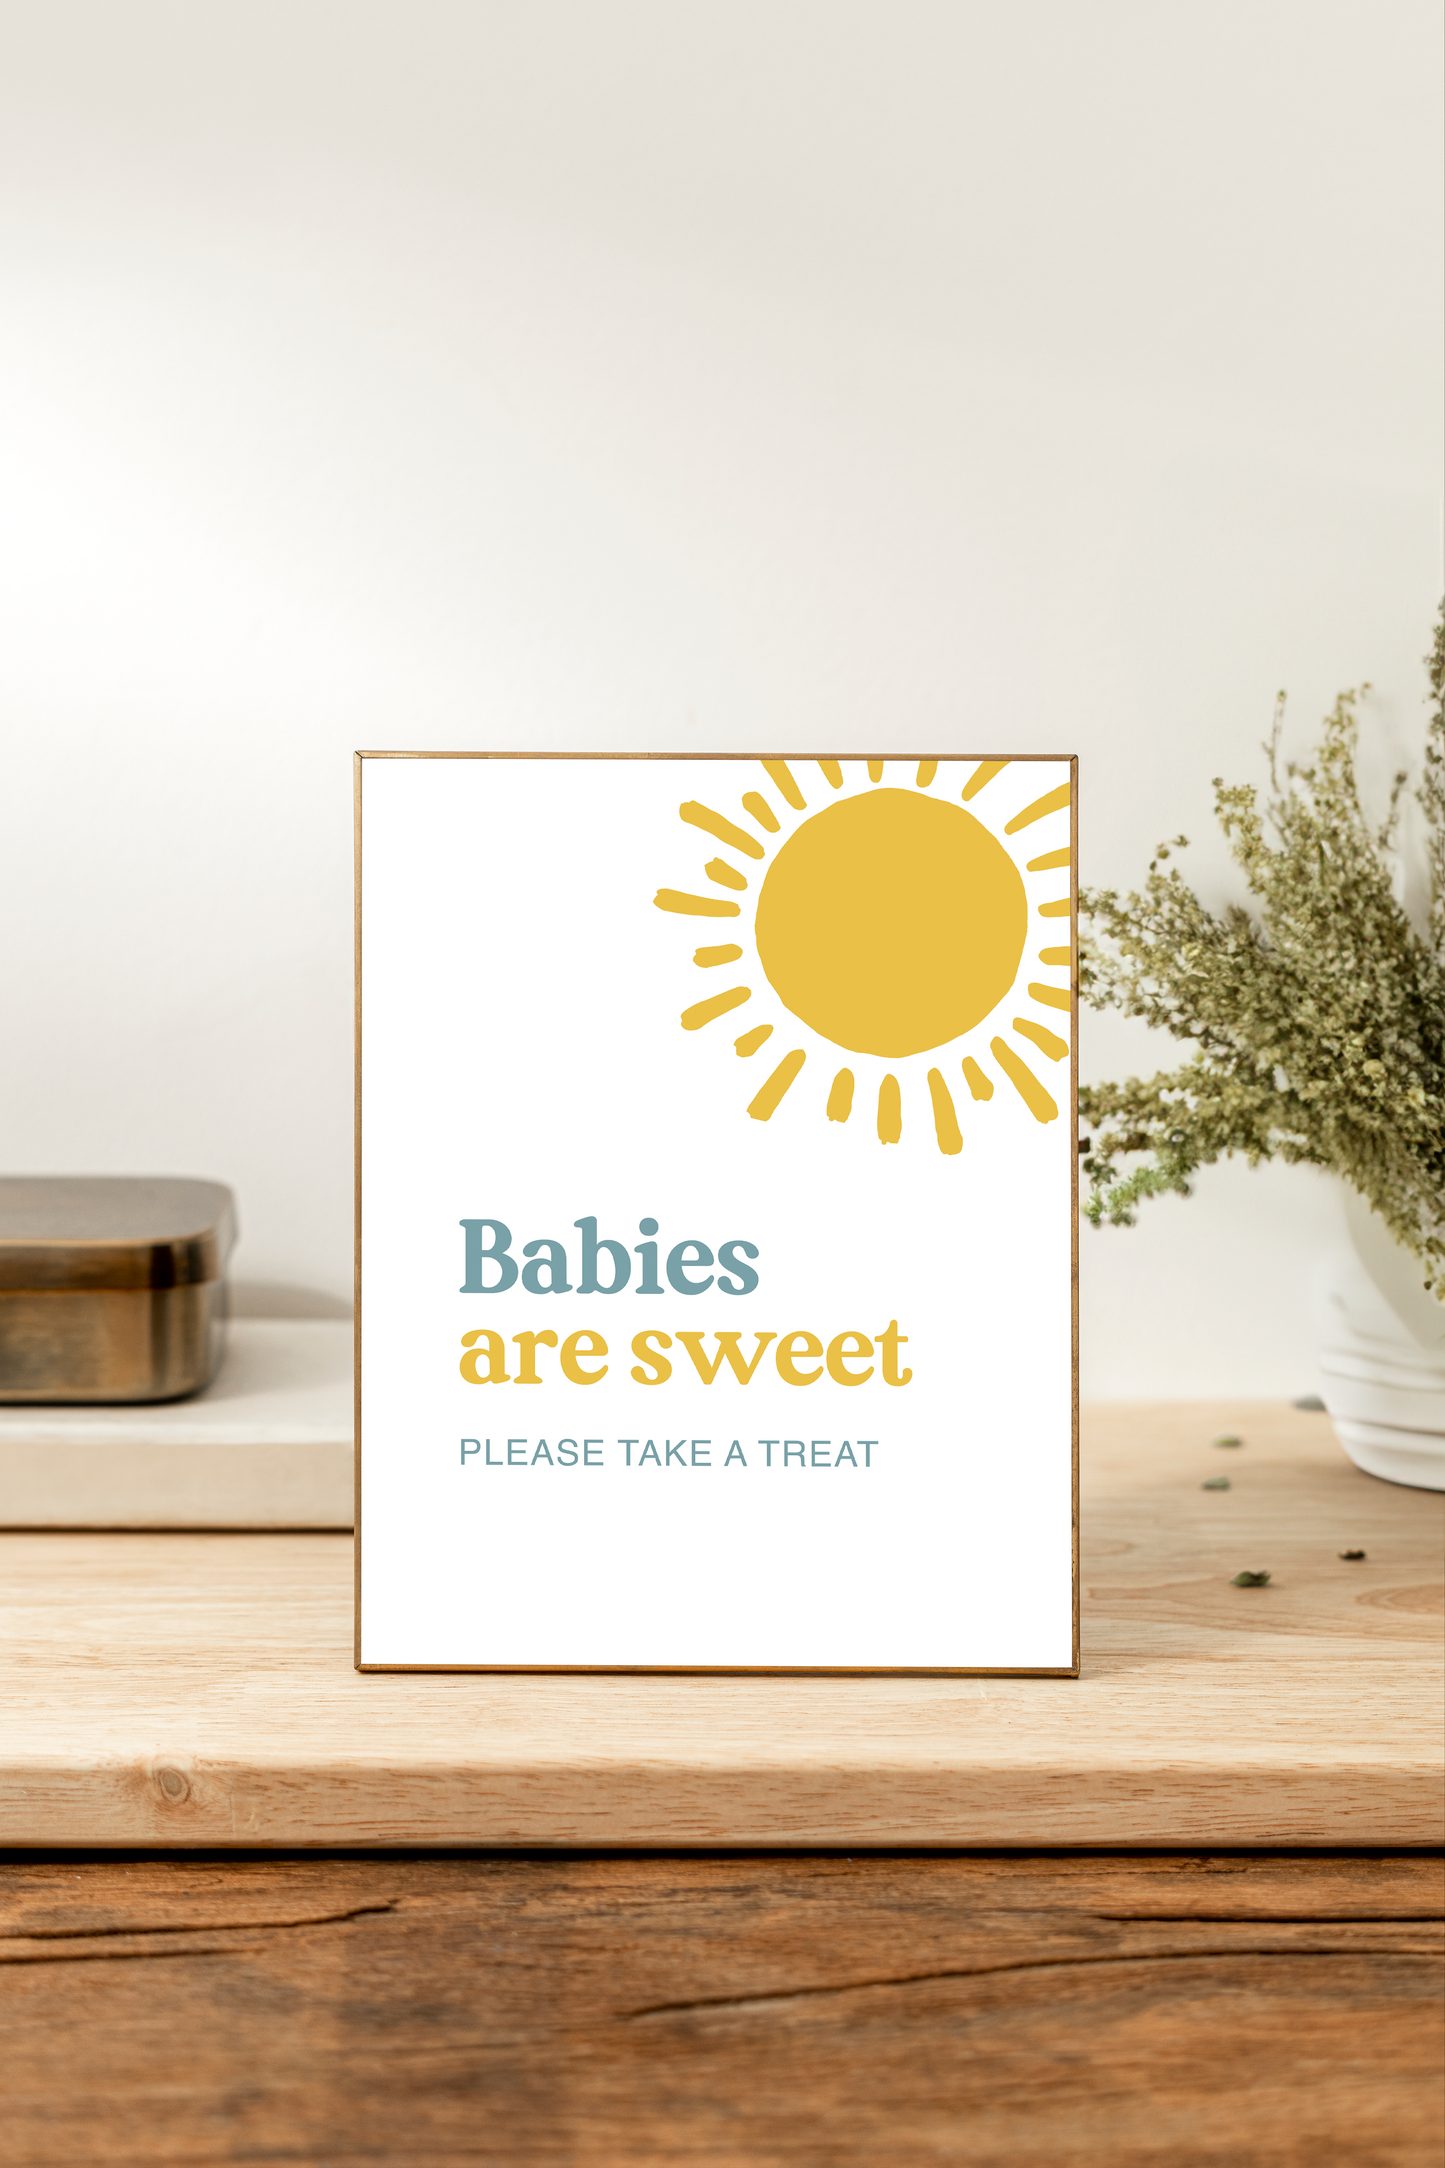 Here comes the son baby shower printable bundle